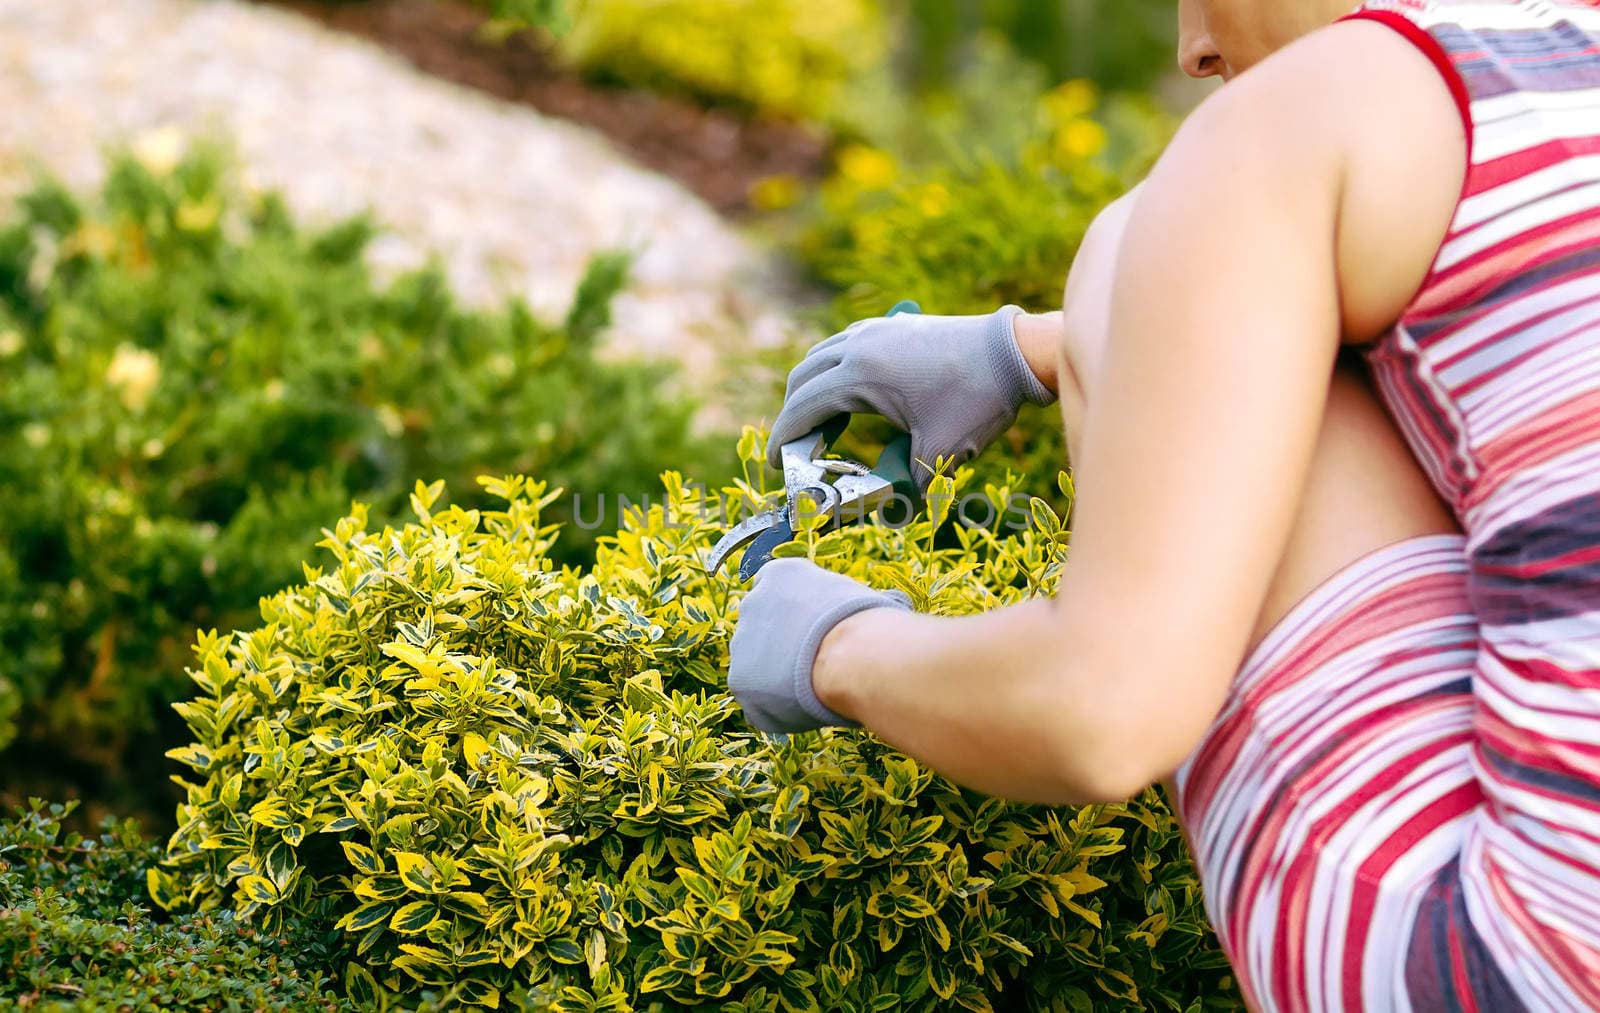 detail of woman hand gardening with rubber gloves